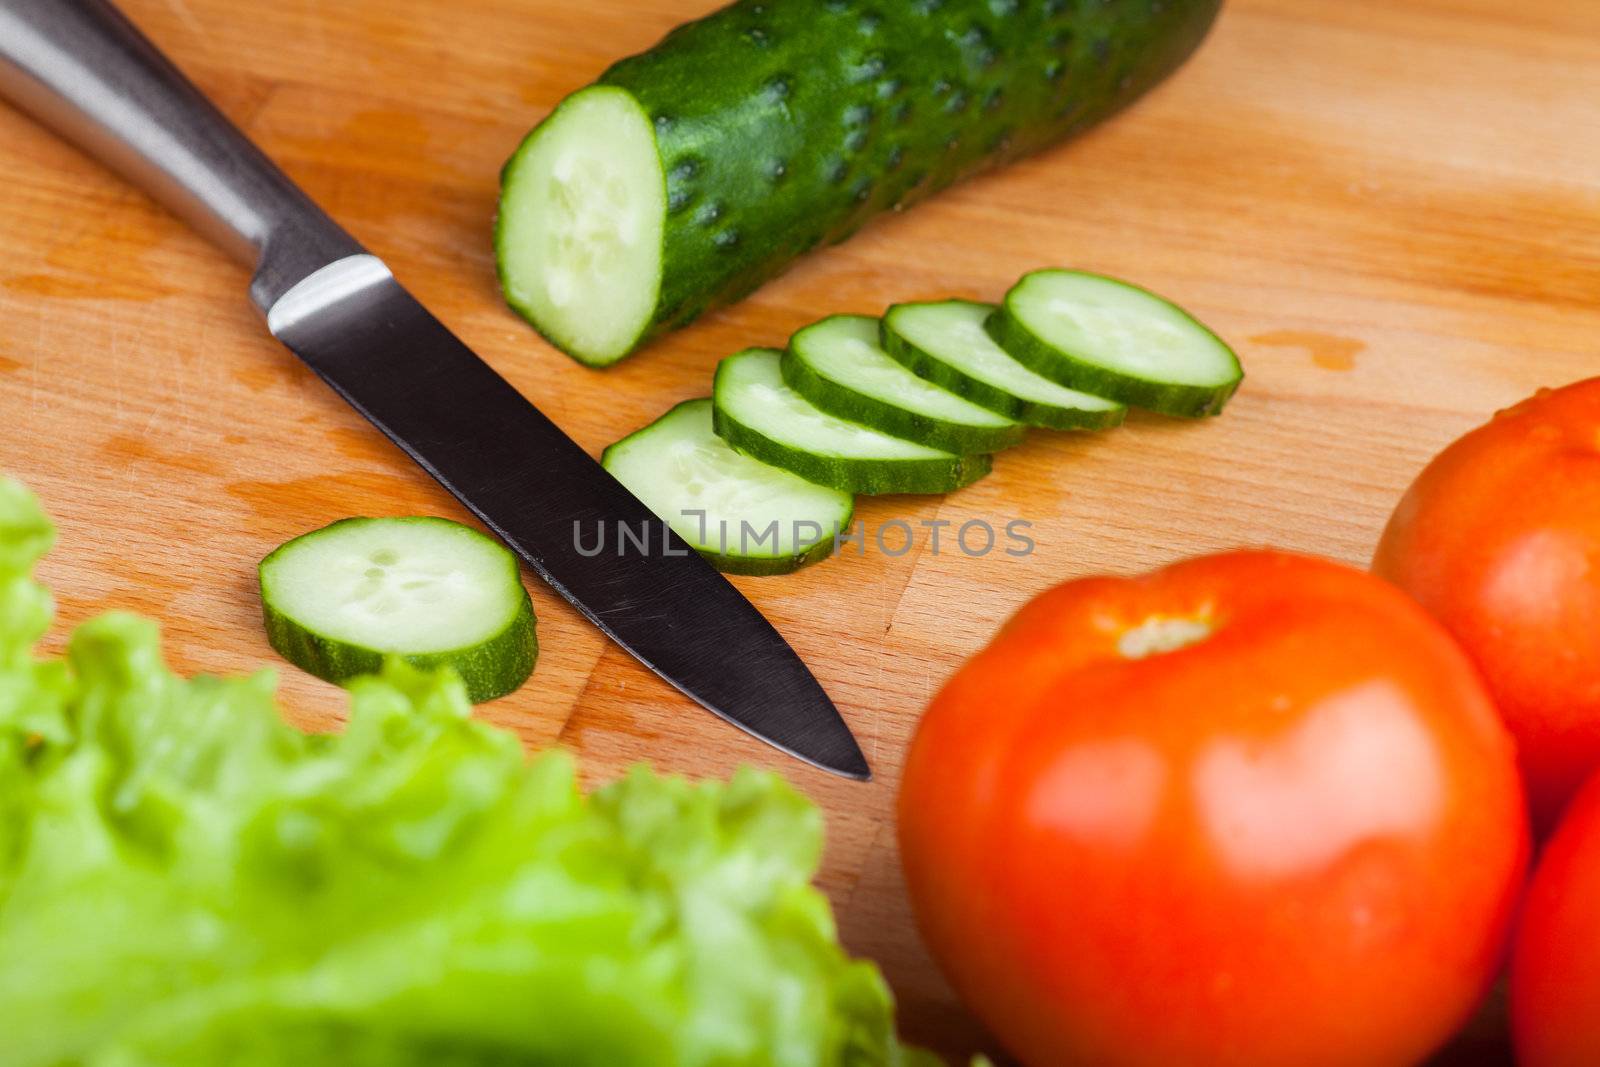 Vegetables (tomato, cucumber, salad) on a wooden table